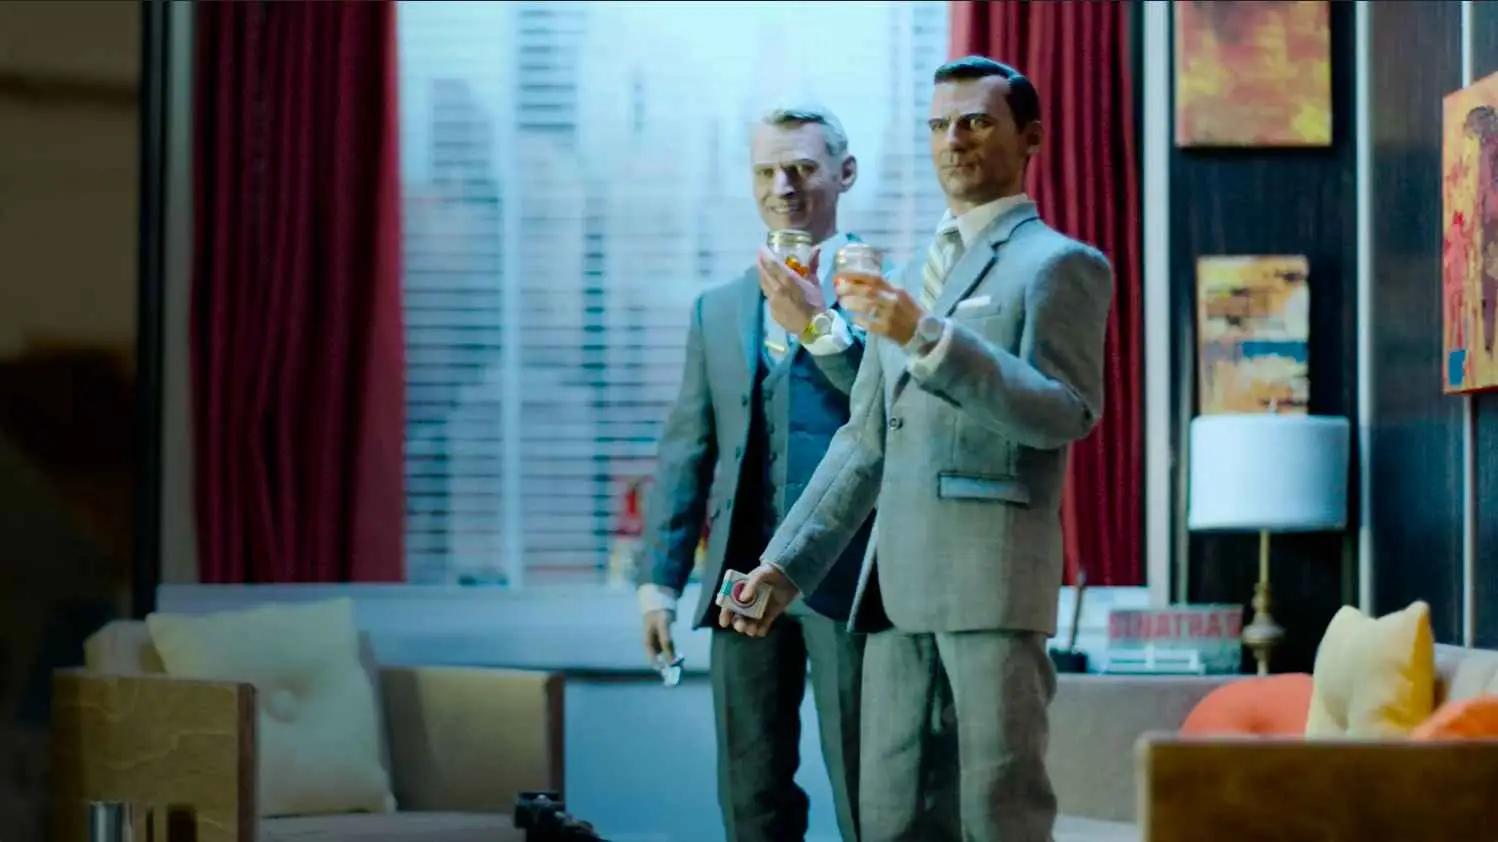 Two men dressed in suits holding drinks, standing in a room with urban views through the window, surrounded by an array of sales material.